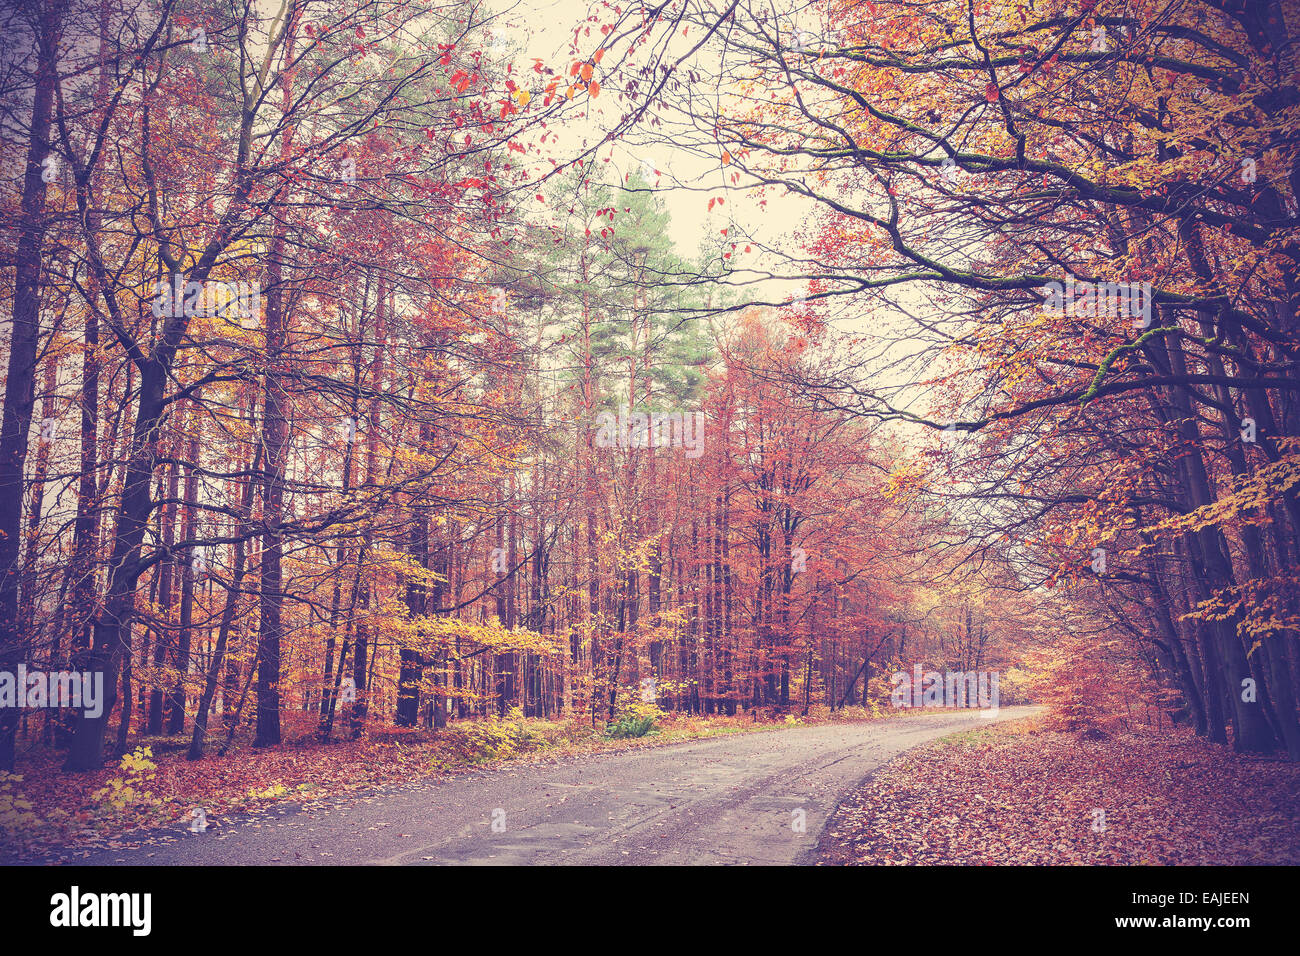 Retro filtered picture of a road in autumnal forest. Stock Photo